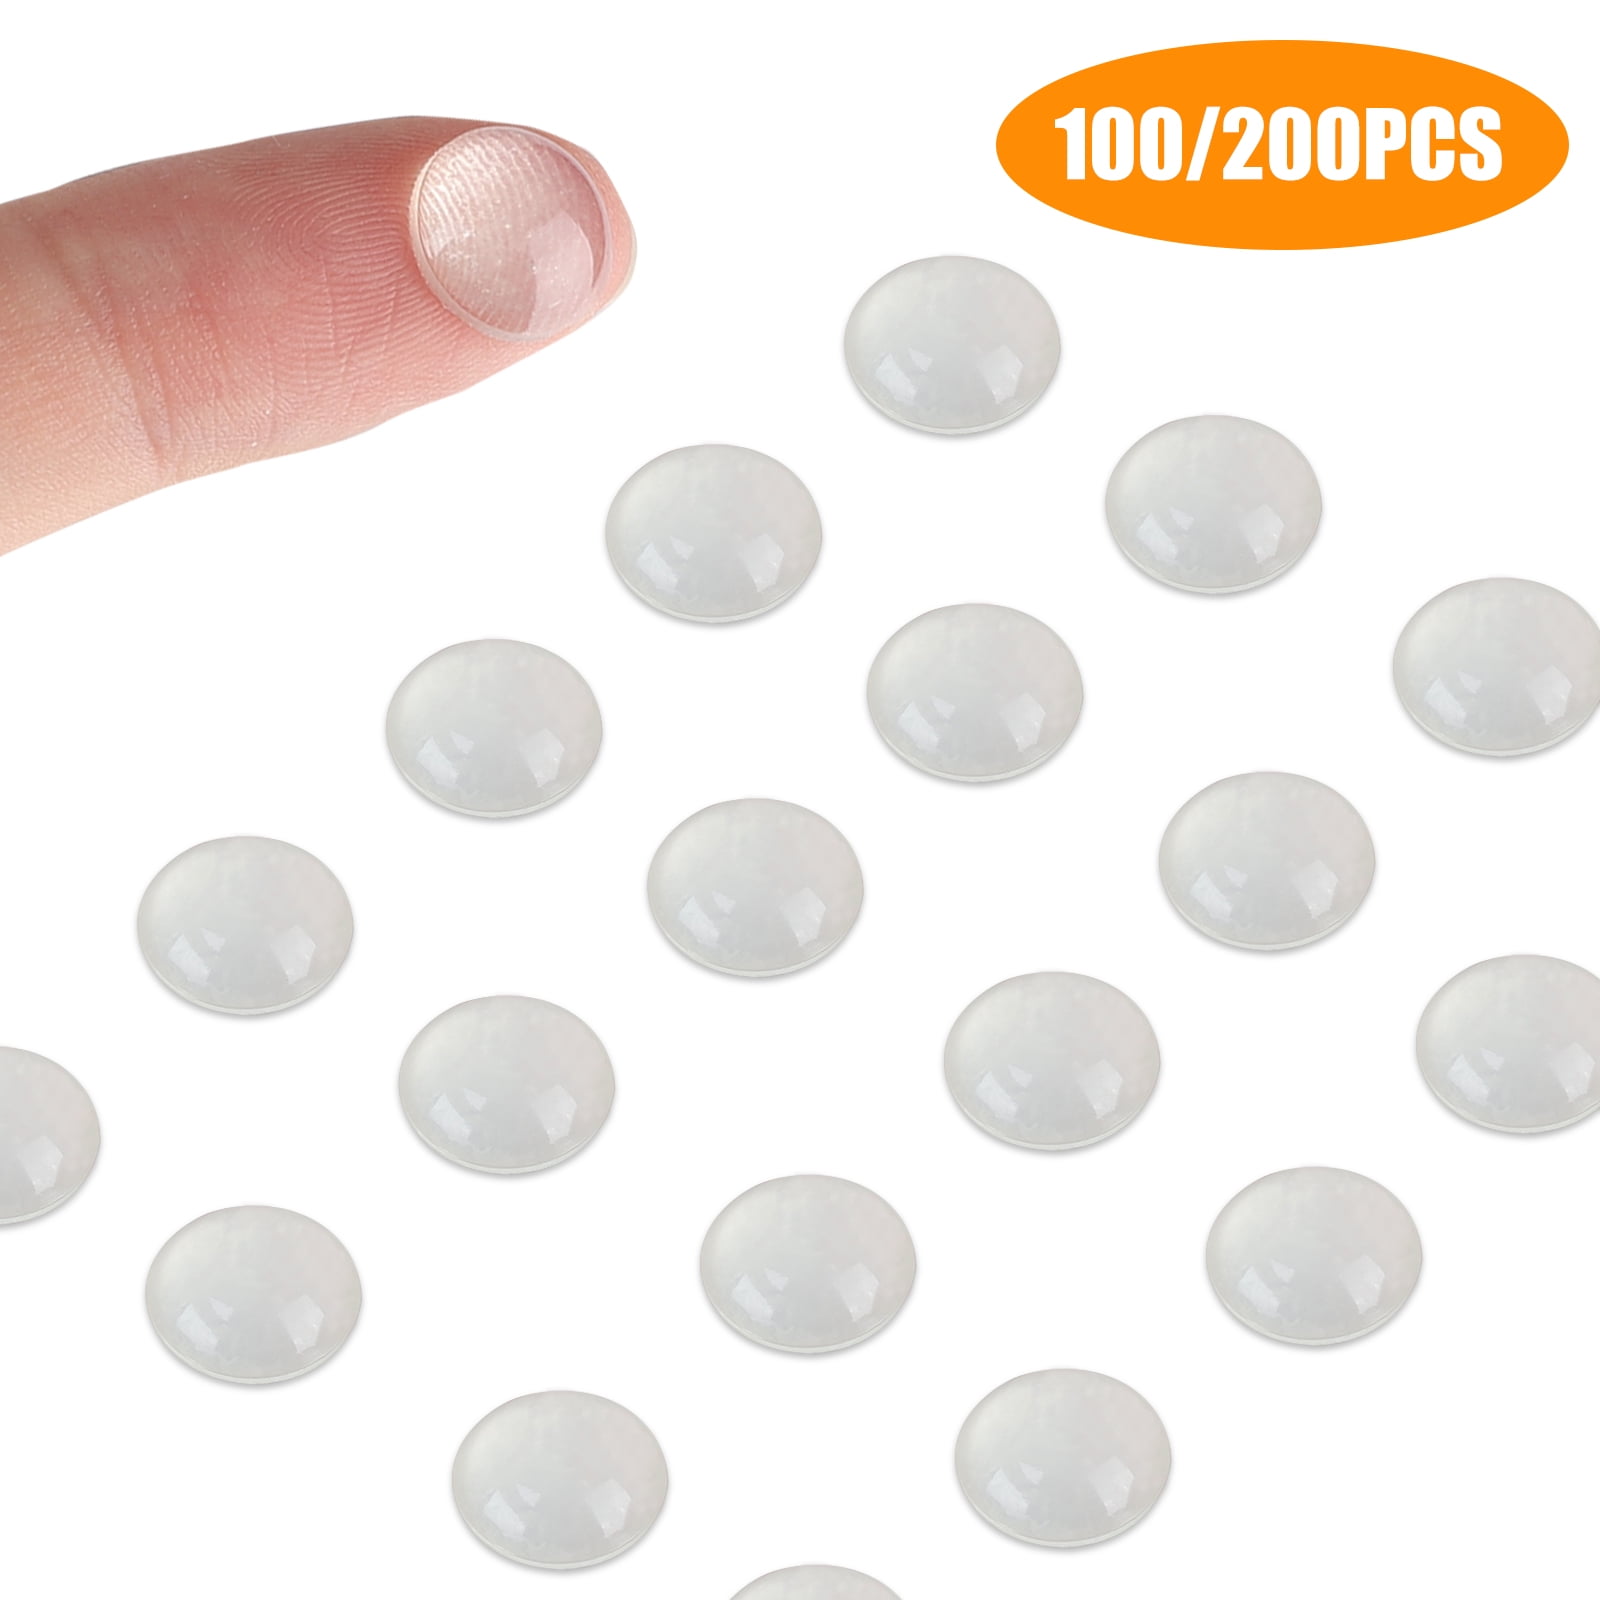 4 X Silicon Pads Dots For Cooker Tops Walls Cupboards Drawer Toilets Door Handle 